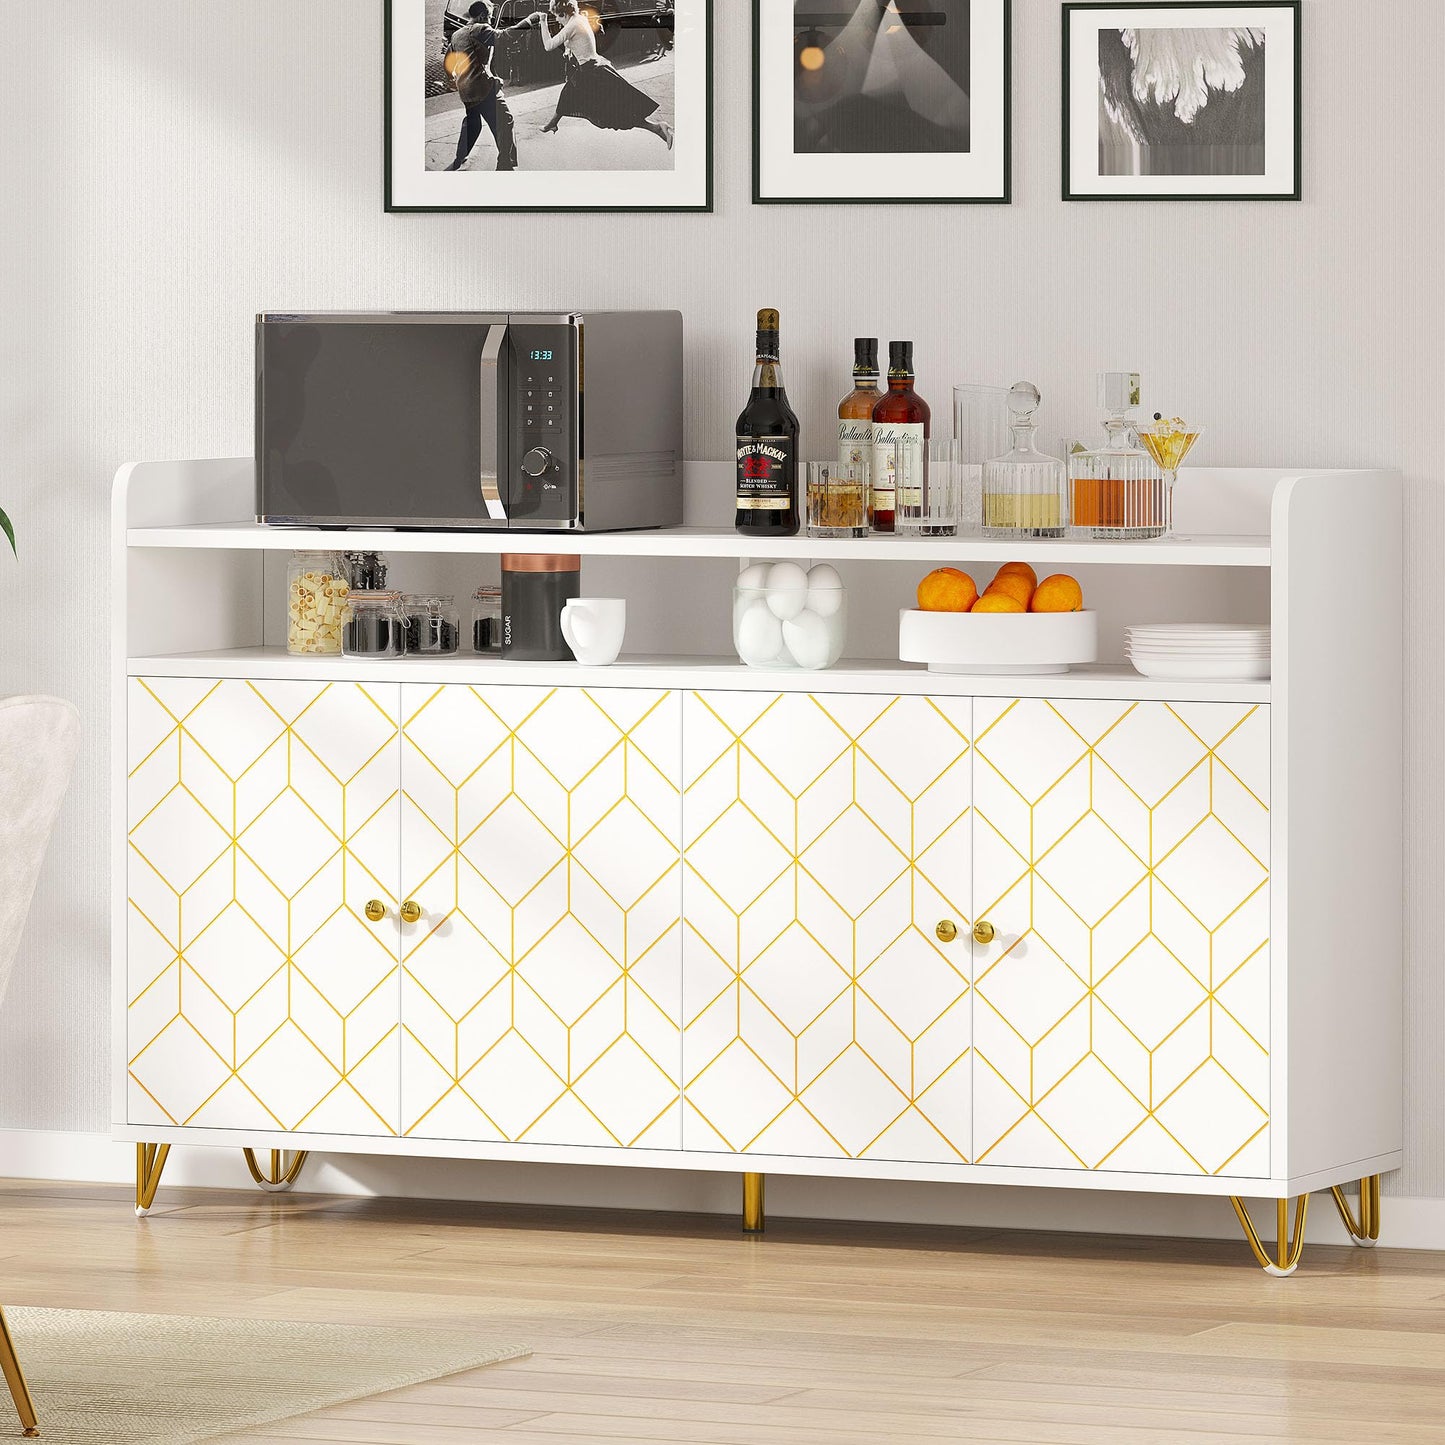 DWVO 59" Modern Storage Cabinet, Sideboard Buffet Cabinet with Gold Trim, Coffee Bar Cabinet with 4 Doors and Adjustable Shelves 300 lbs Capacity for Hallway, Kitchen or Living Room, White